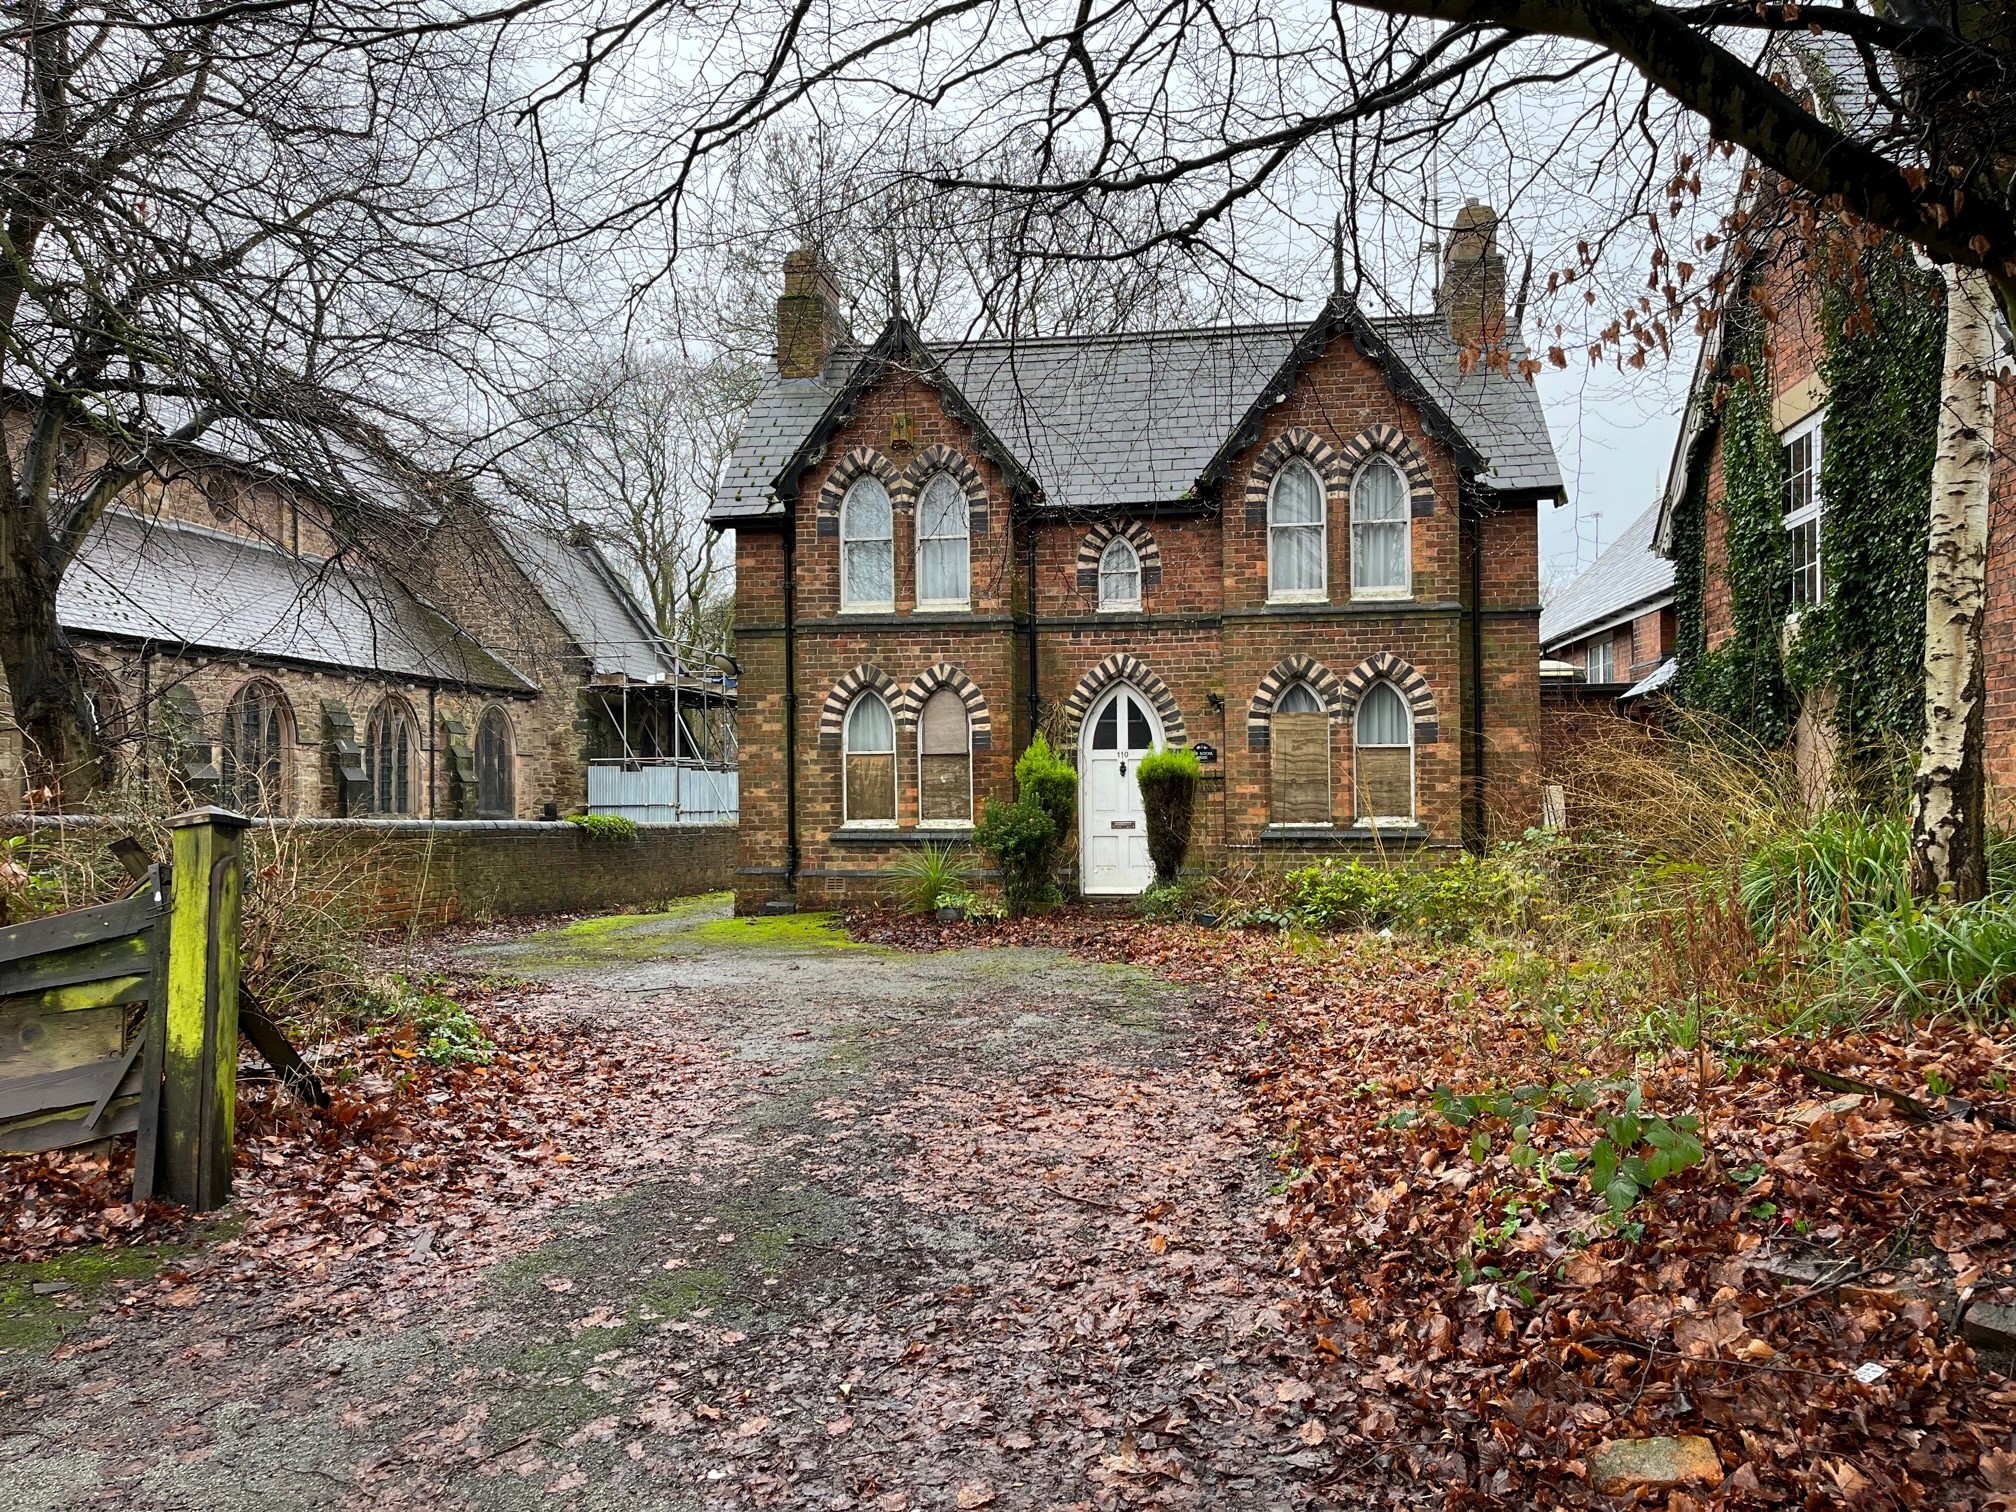 The Old School House, in Somercotes, will go to auction in January 2023